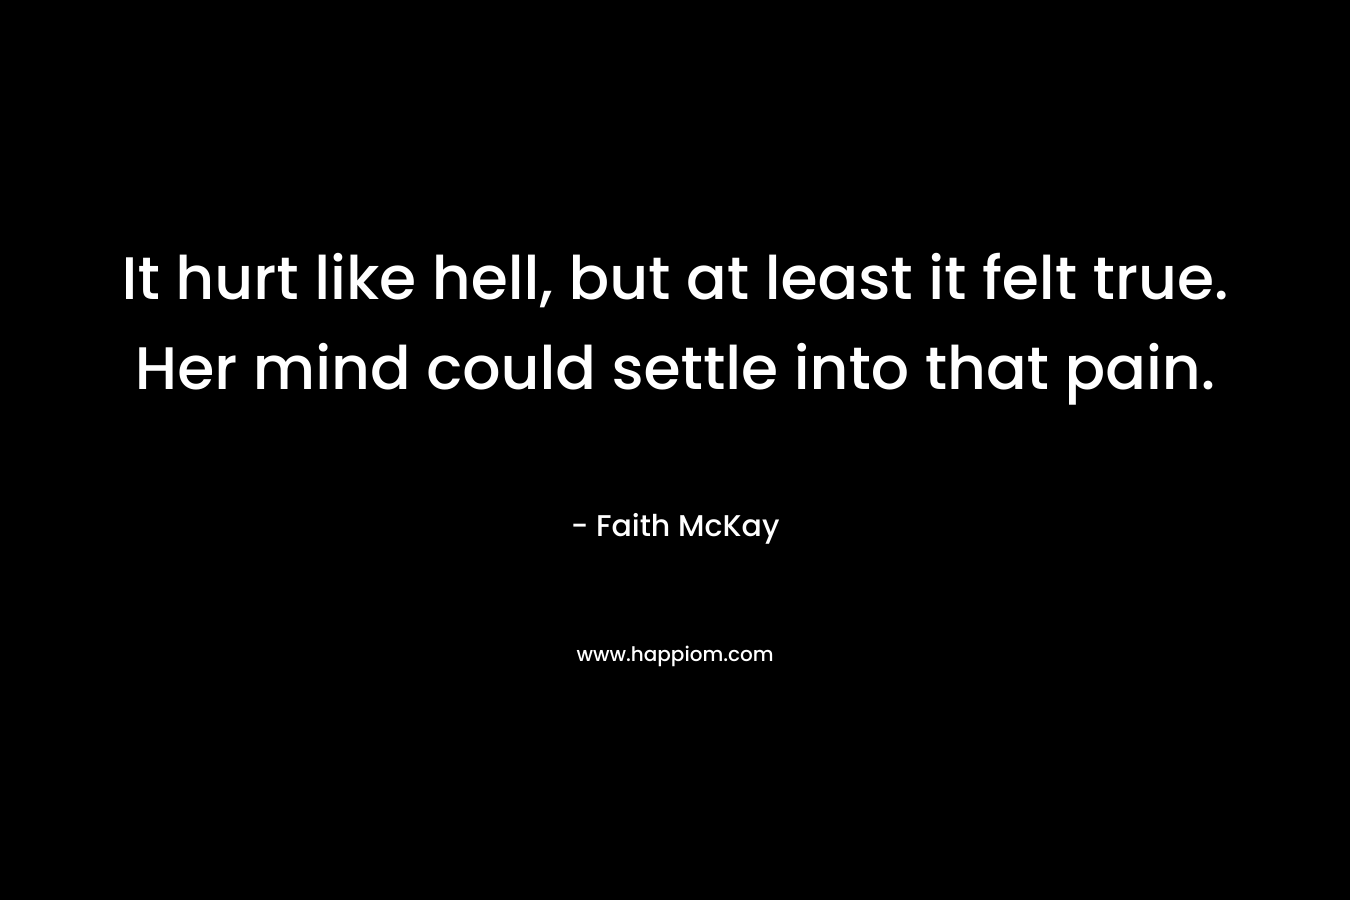 It hurt like hell, but at least it felt true. Her mind could settle into that pain. – Faith McKay